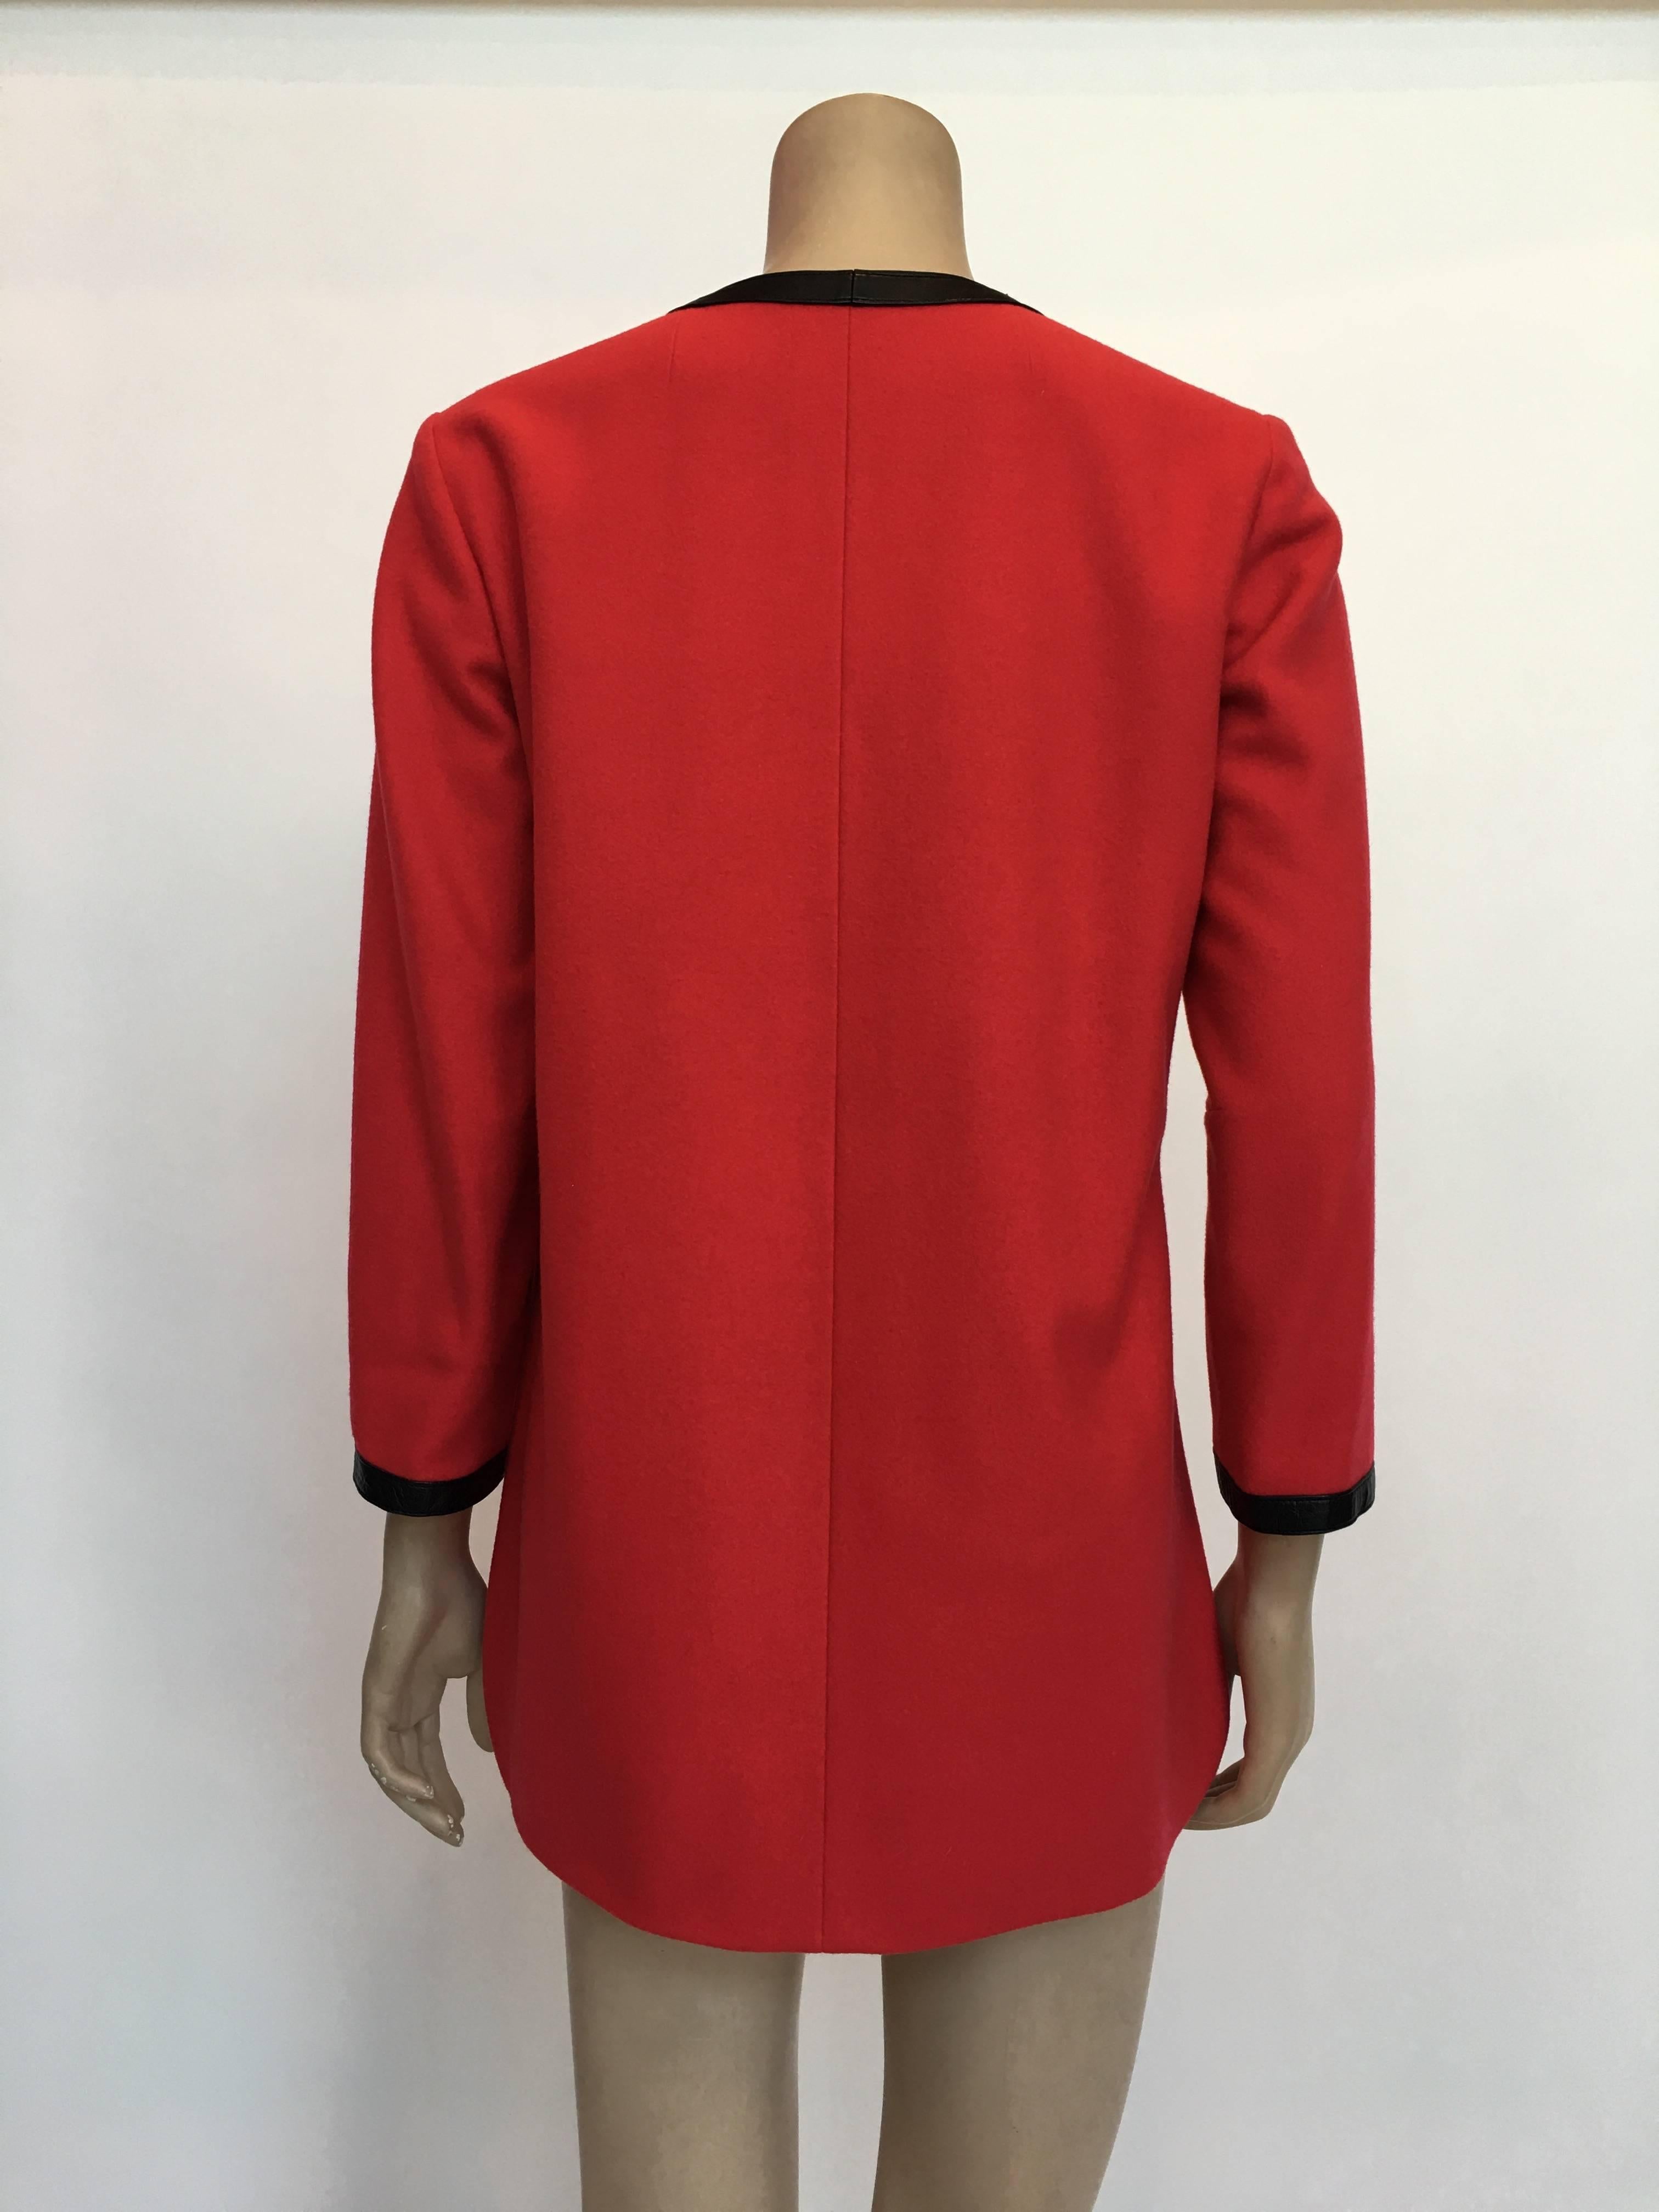 Hermes 1970's Crimson Red Tunic Top with Black Leather Strapping 
Made in France

Measurements : *ALL MEASUREMENTS TAKEN FLAT*
Shoulders : 16